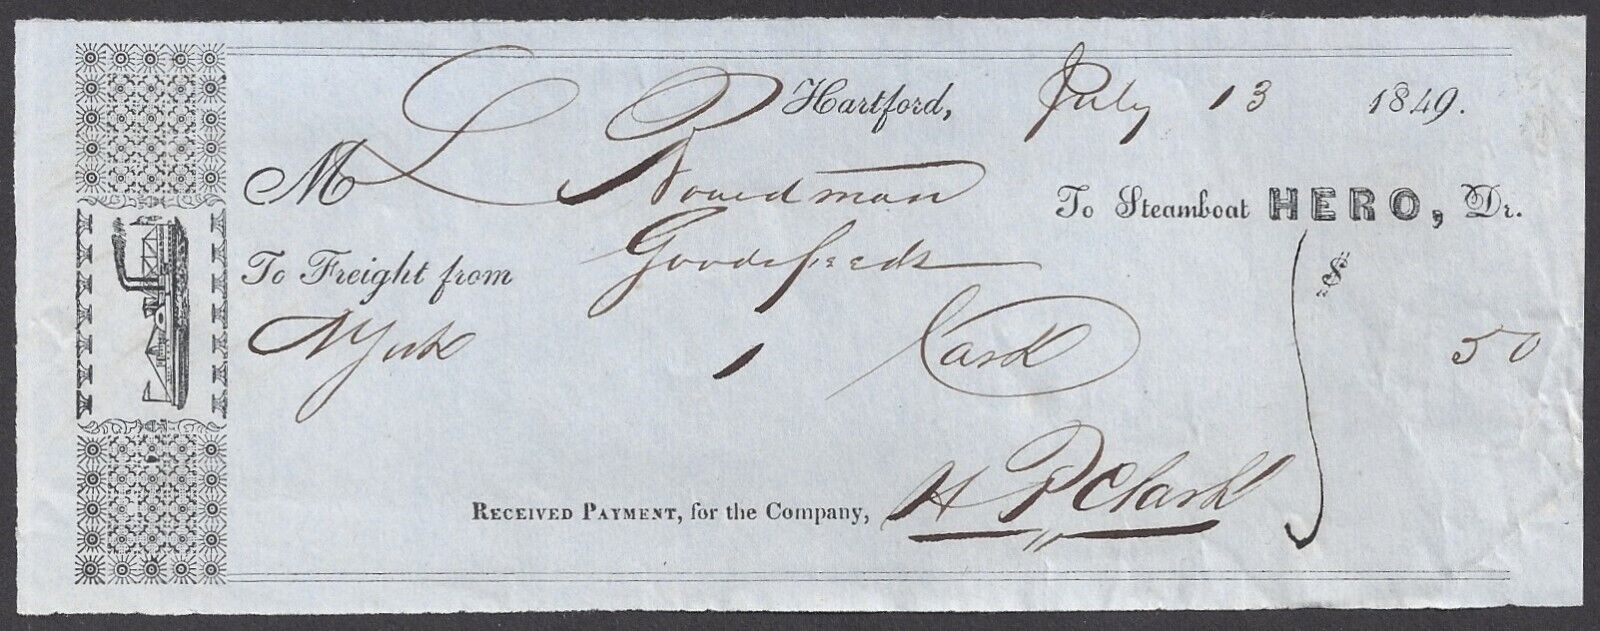 HARTFORD, CT ~ STEAMER HERO ~ Freight from NY ~ Illustrated Receipt July 1849